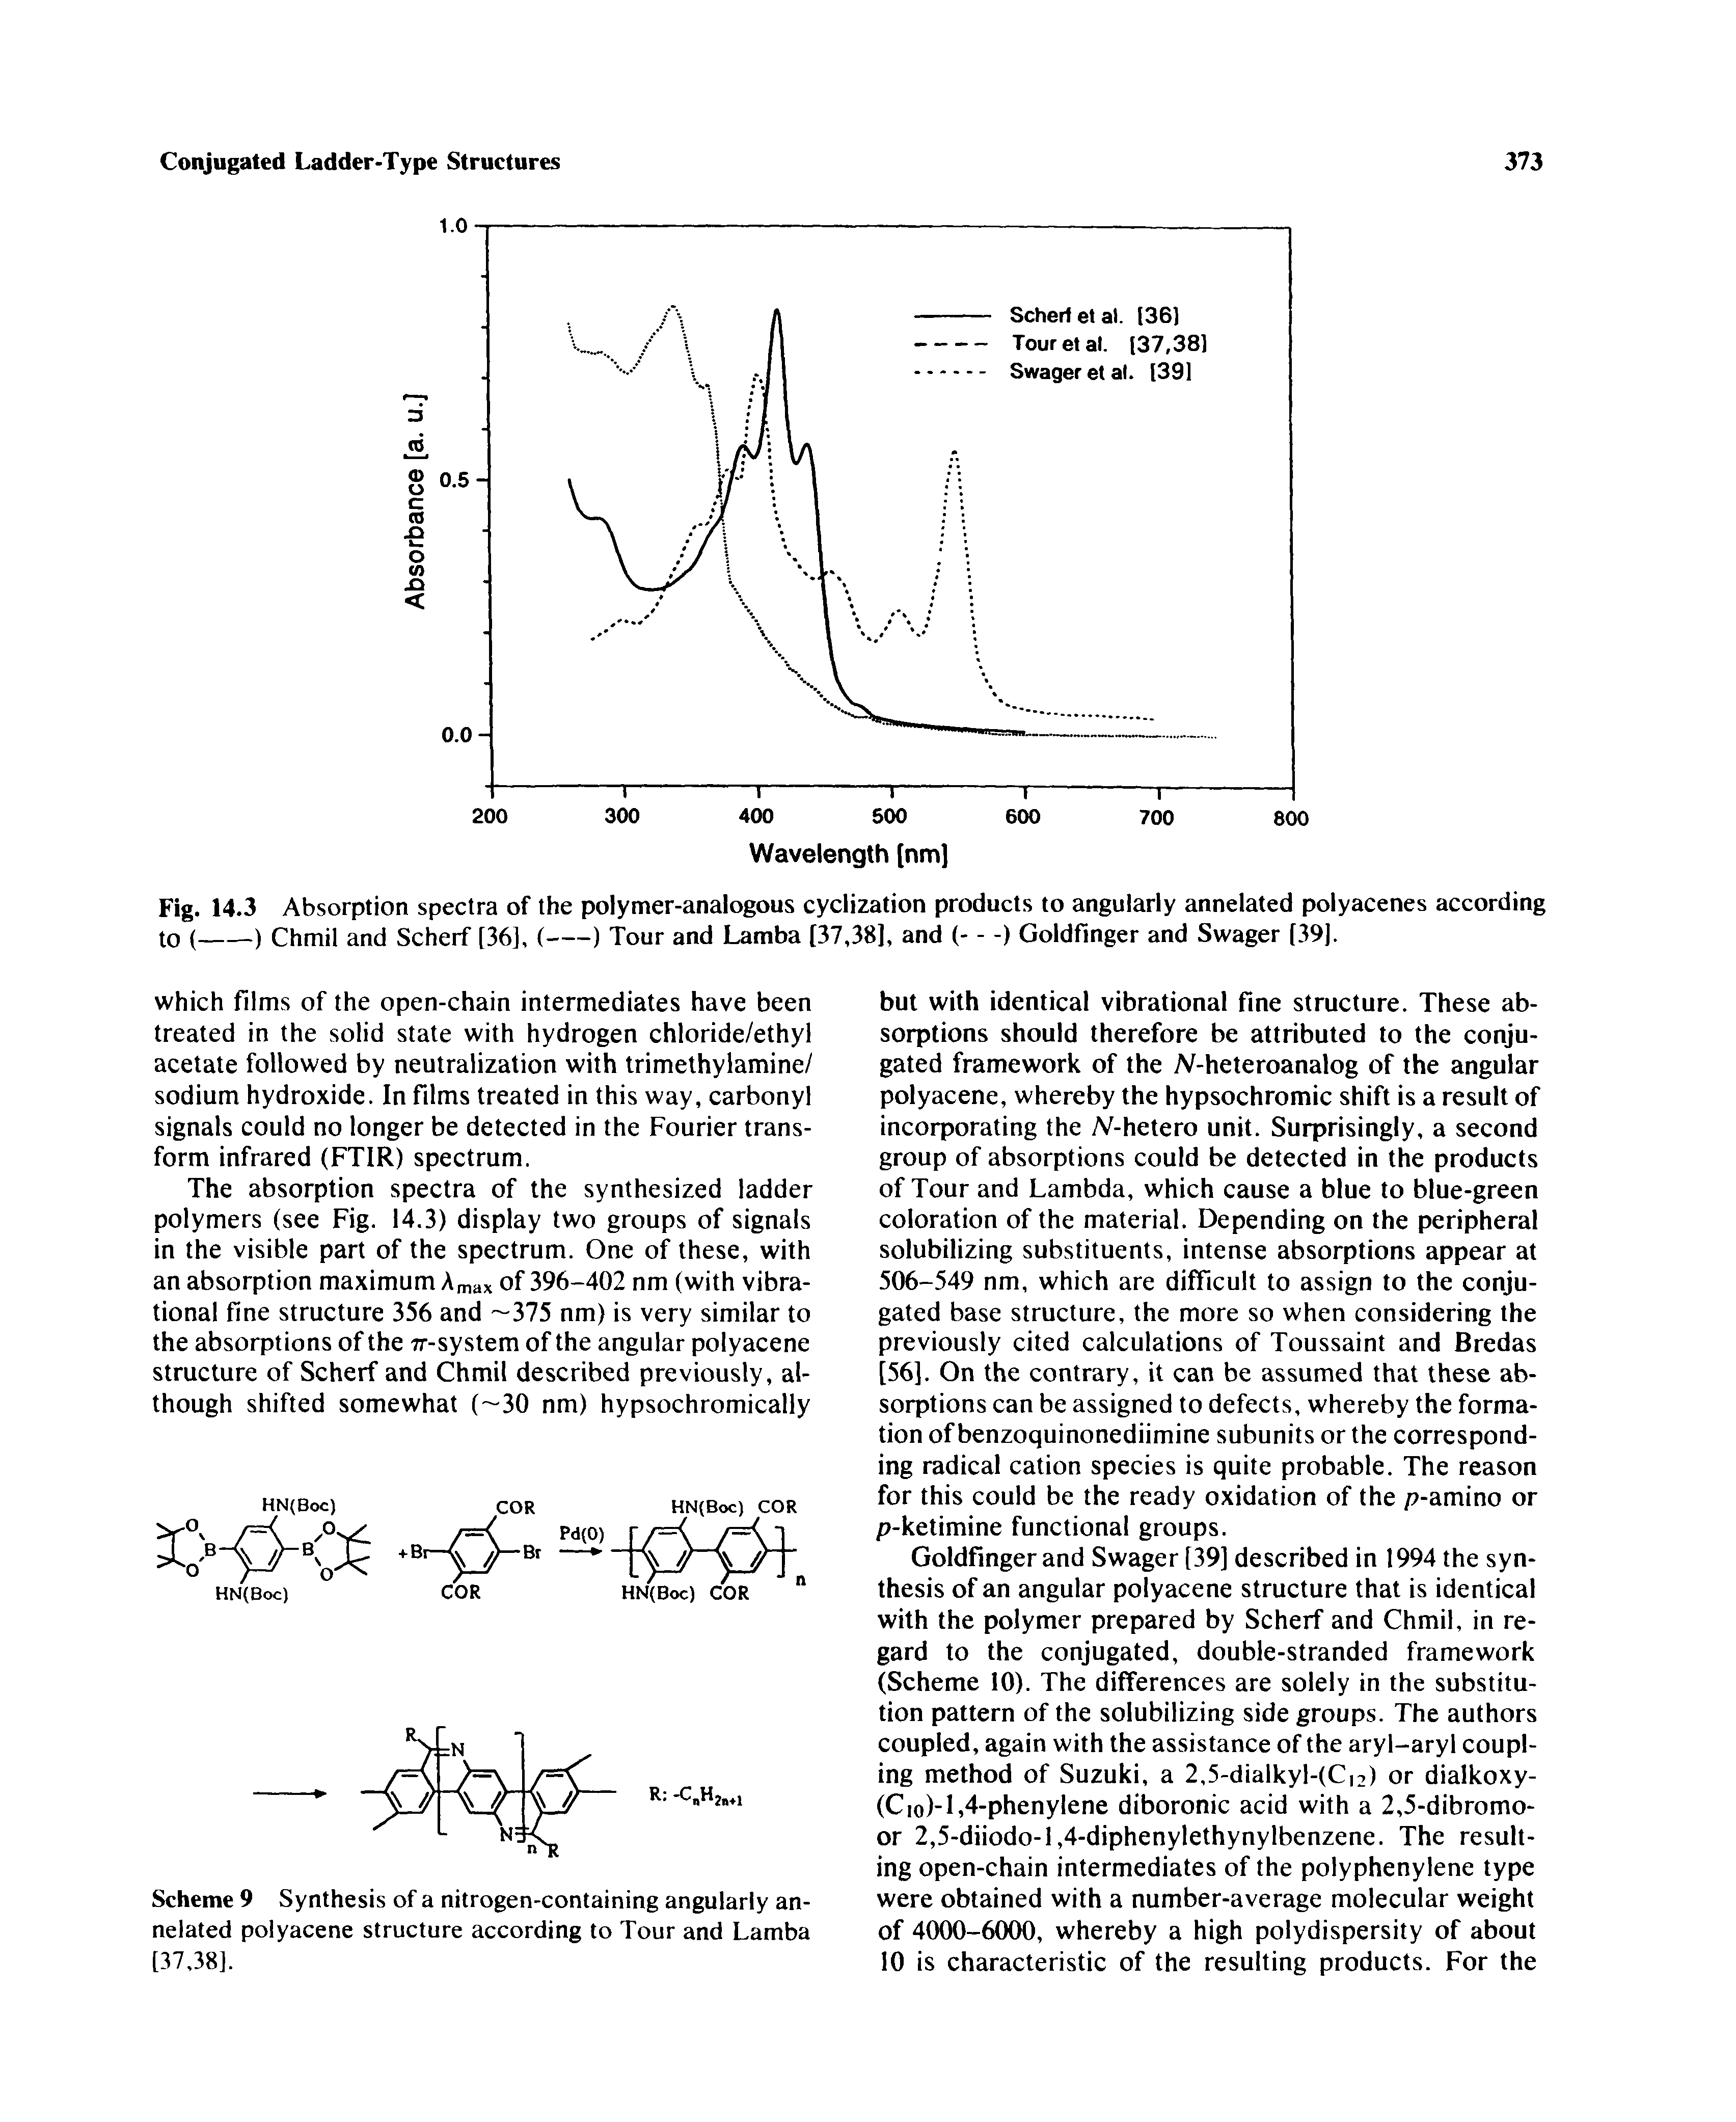 Scheme 9 Synthesis of a nitrogen-containing angularly annelated polyacene structure according to Tour and Lamba [37,38].